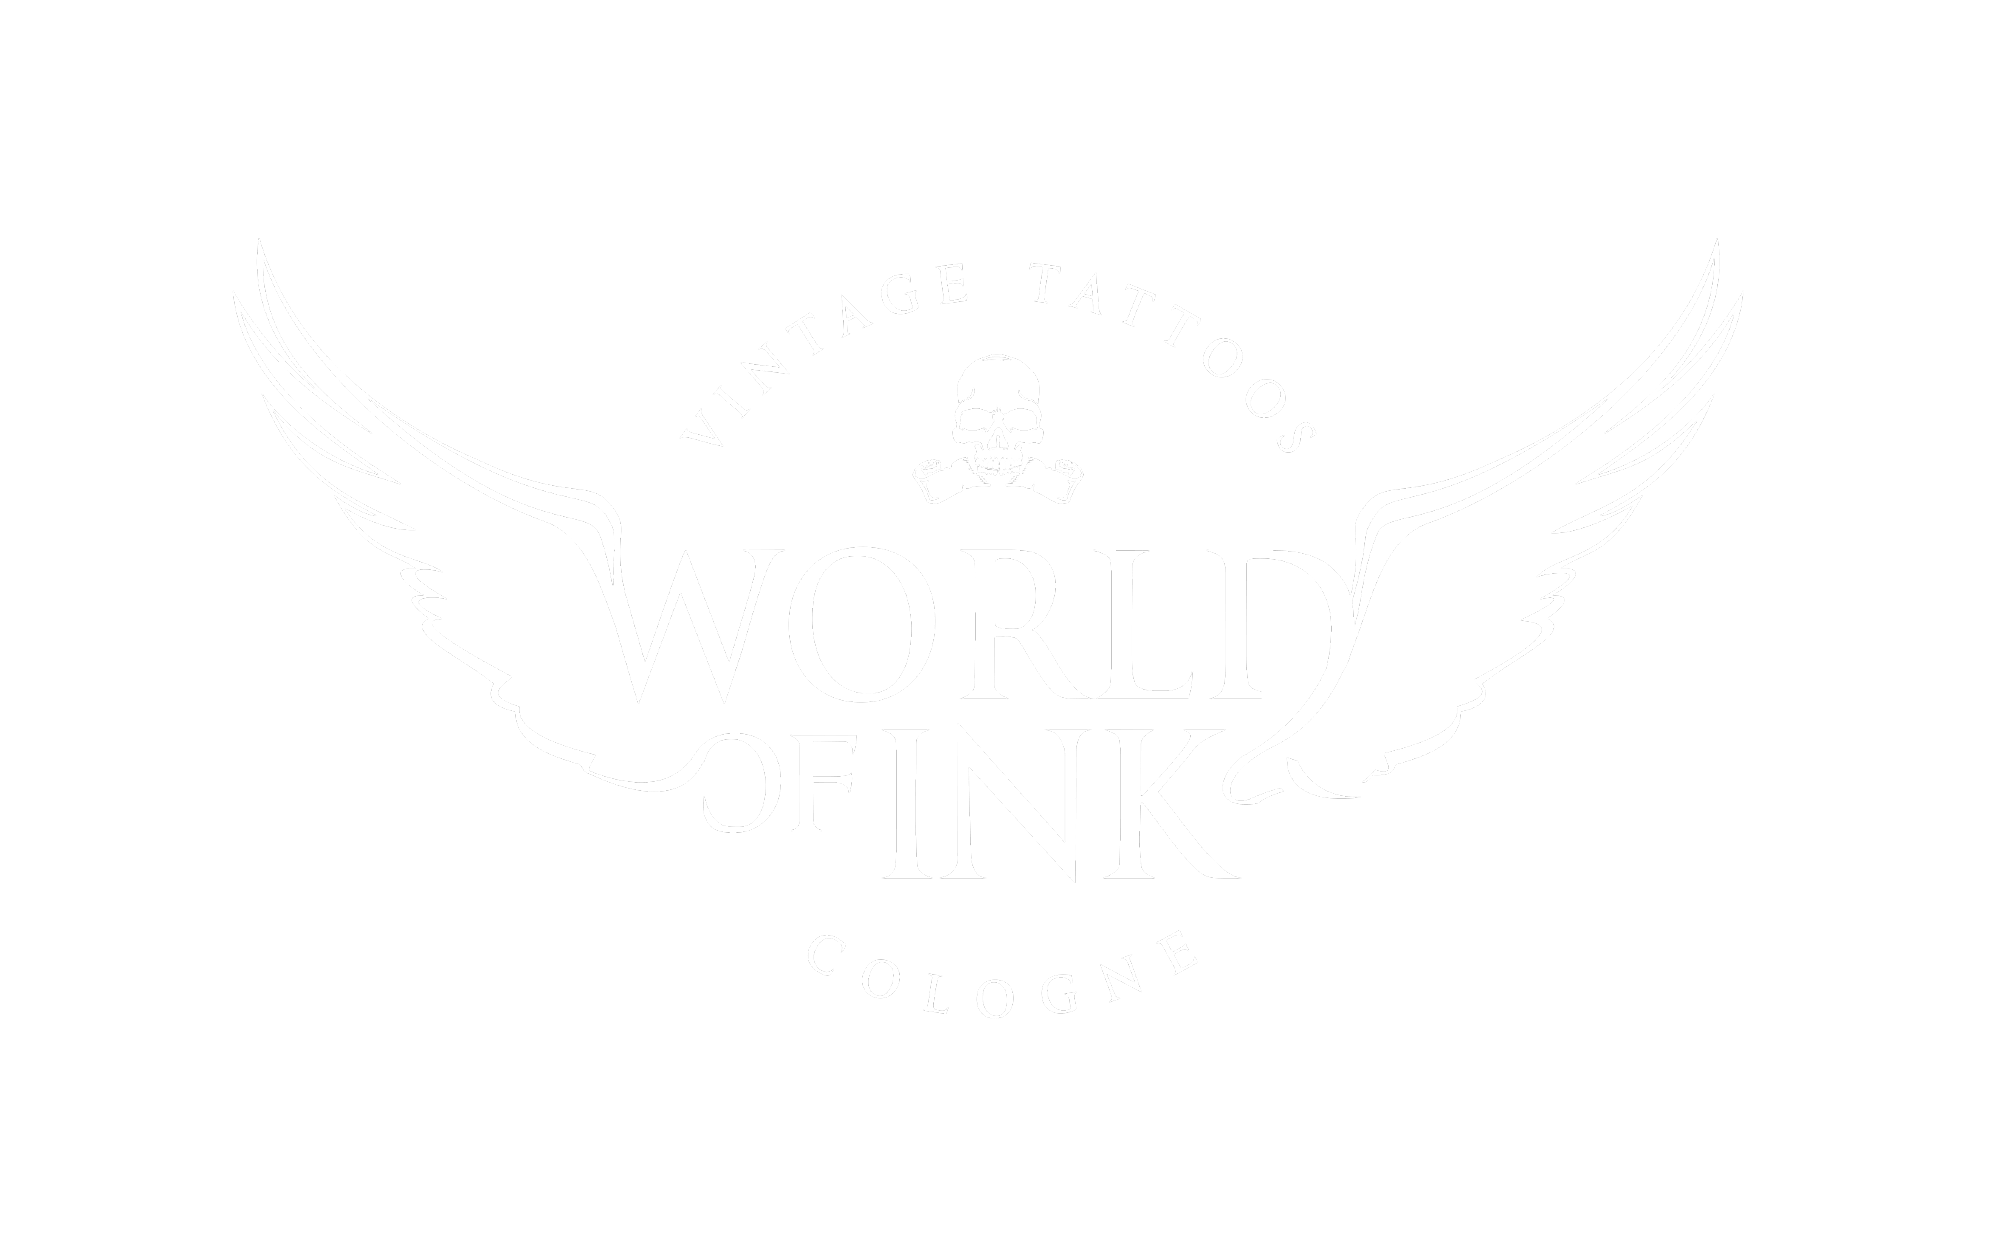 World of Ink